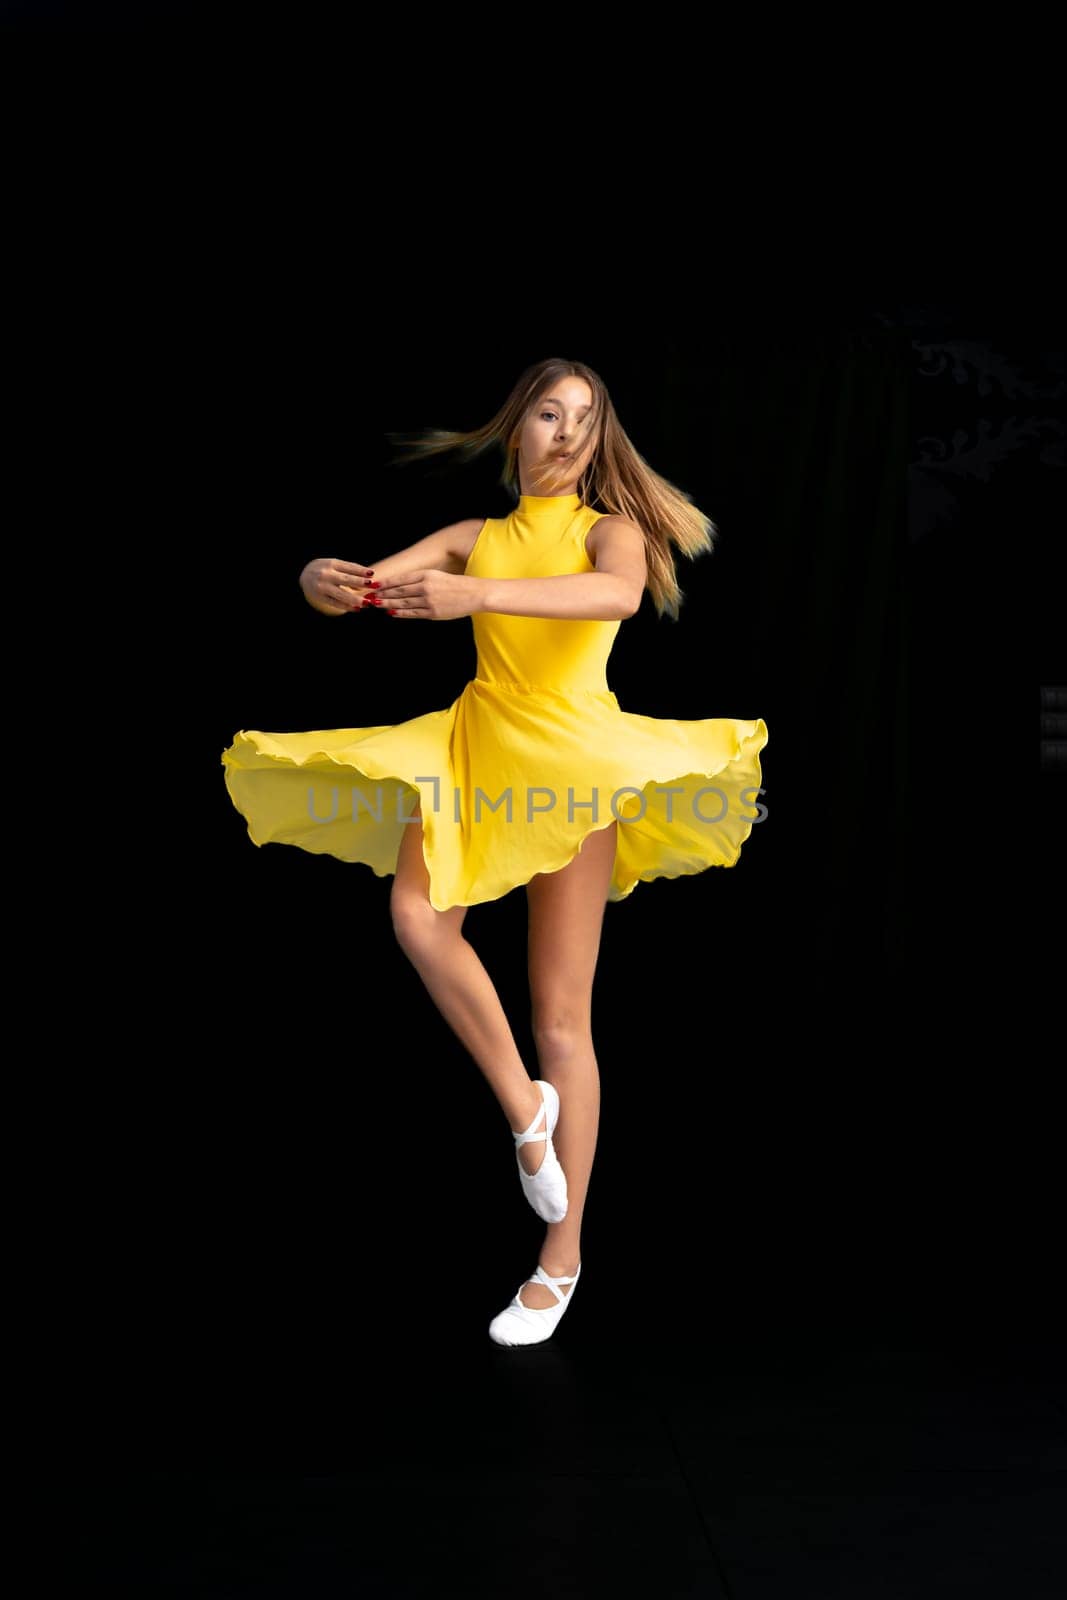 portrait of a teenage ballerina in a yellow suit on a black background by Edophoto